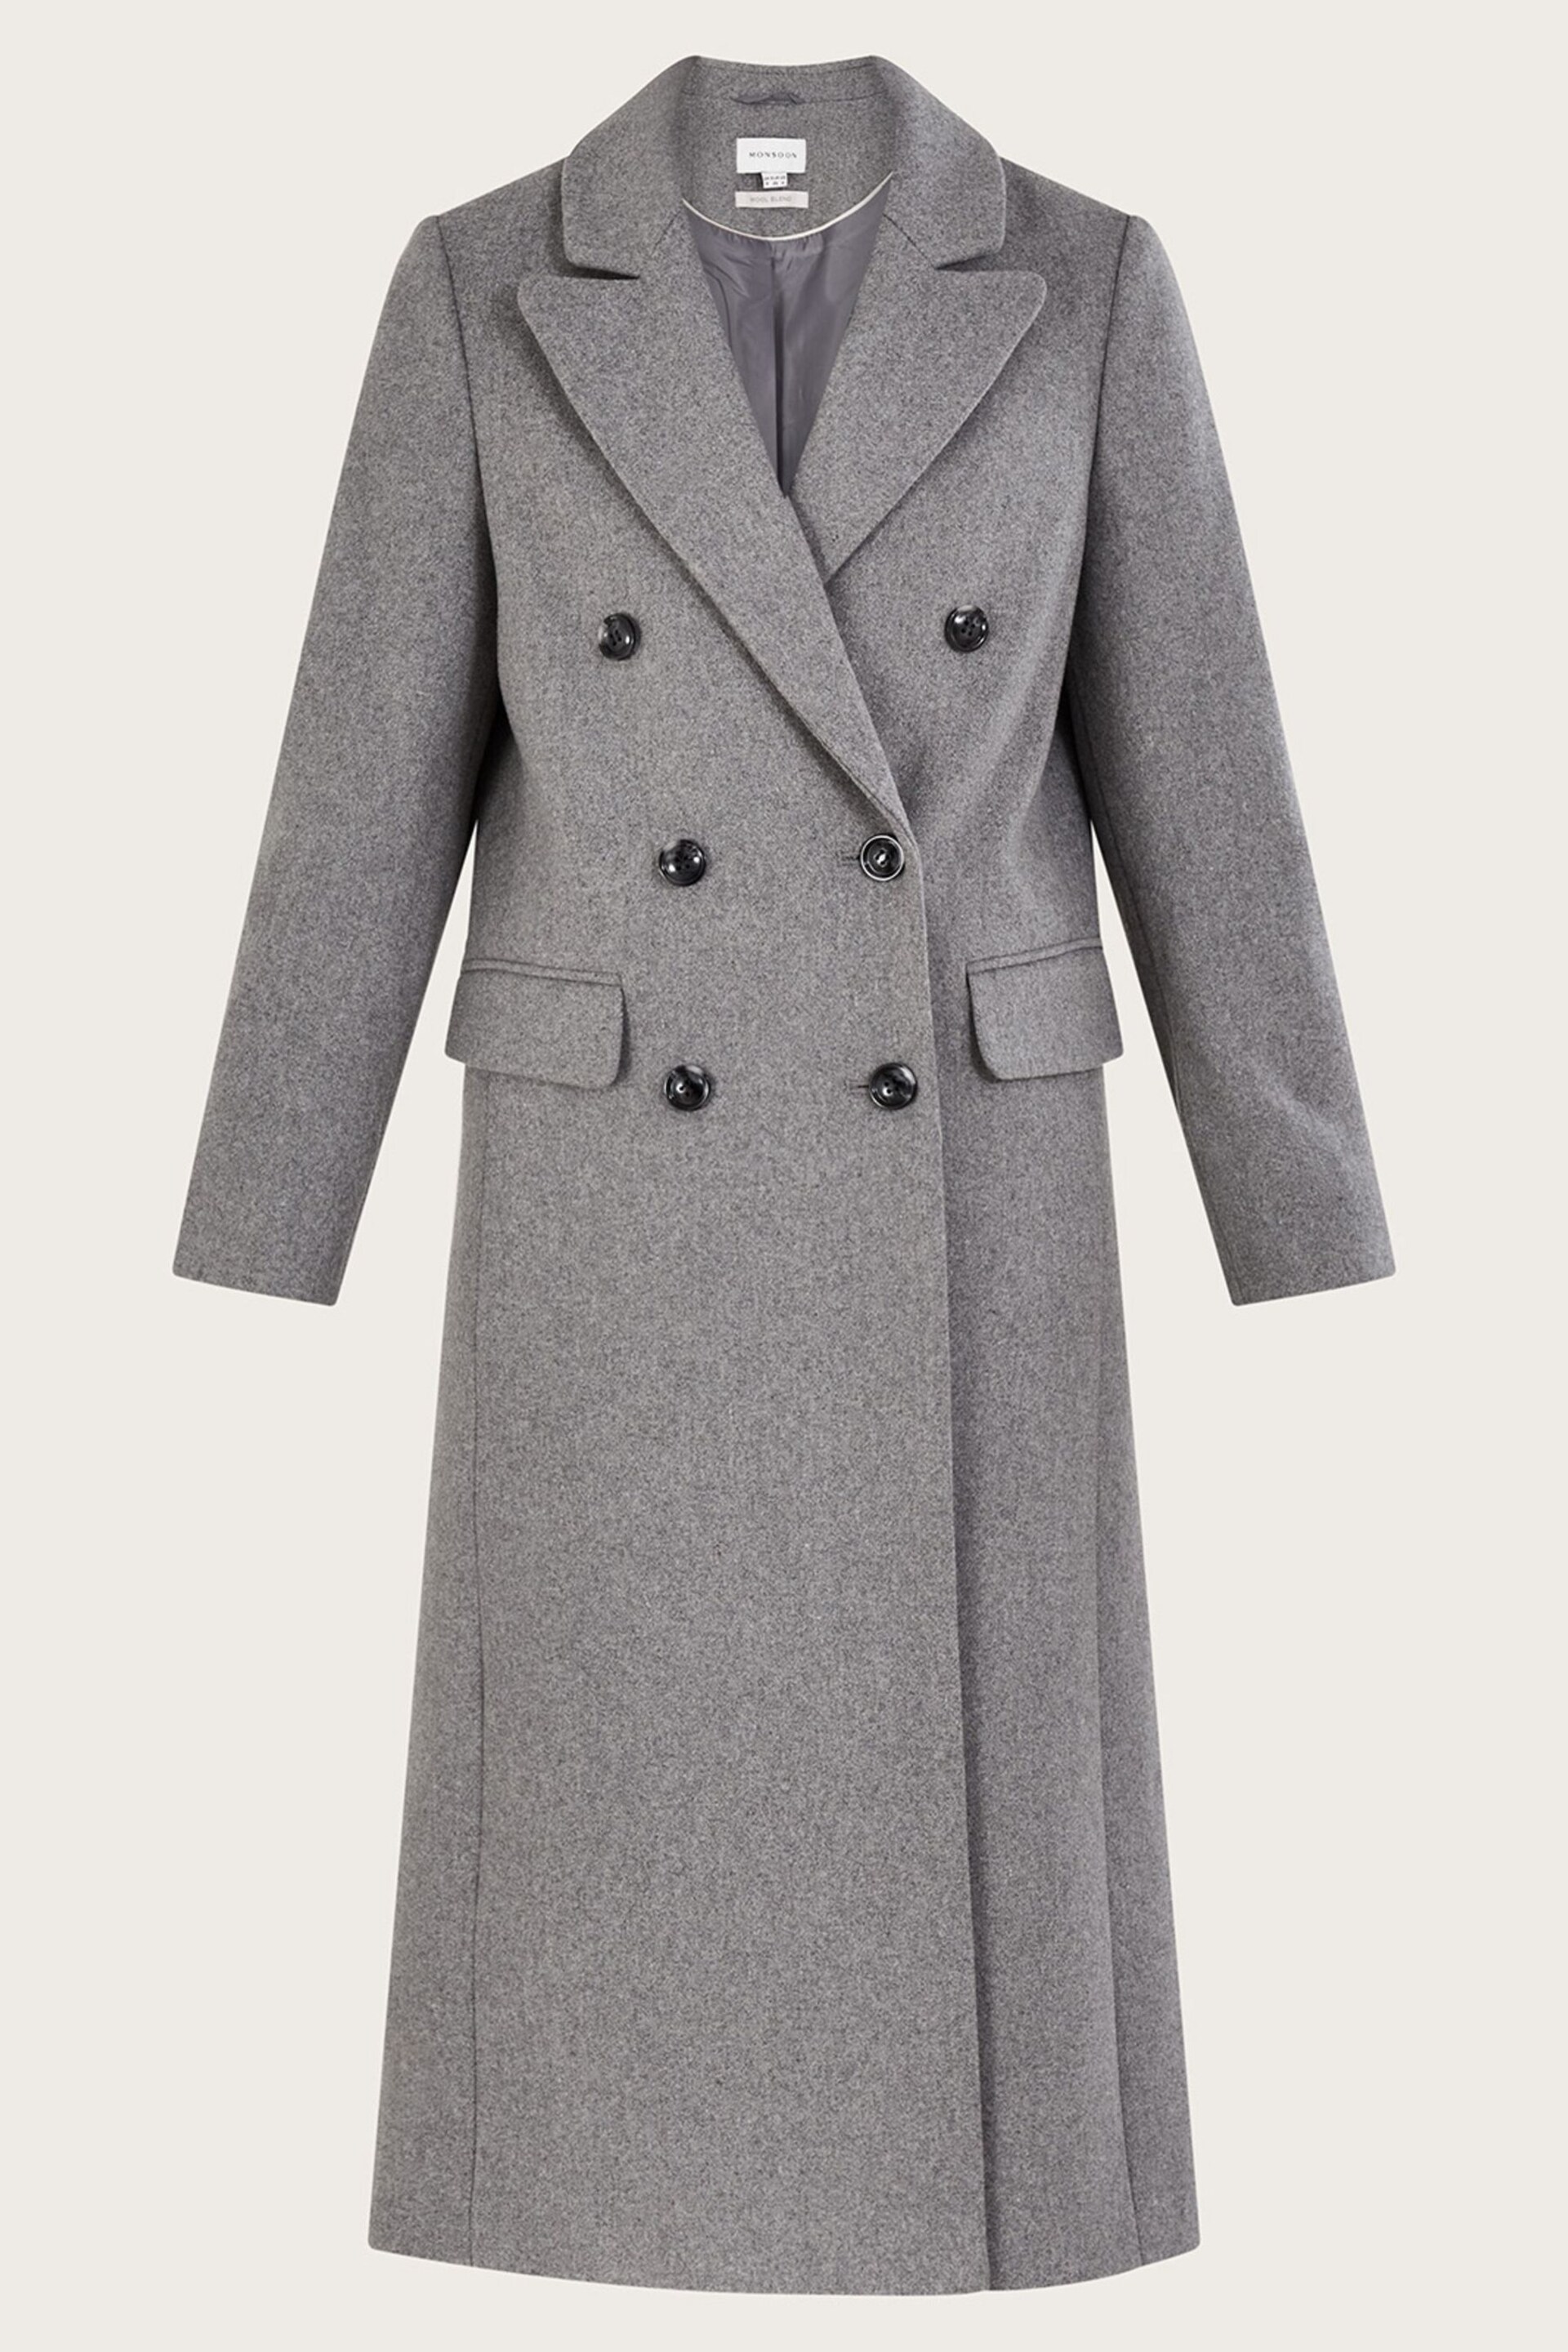 Monsoon Grey Fay Double Breasted Coat - Image 5 of 5